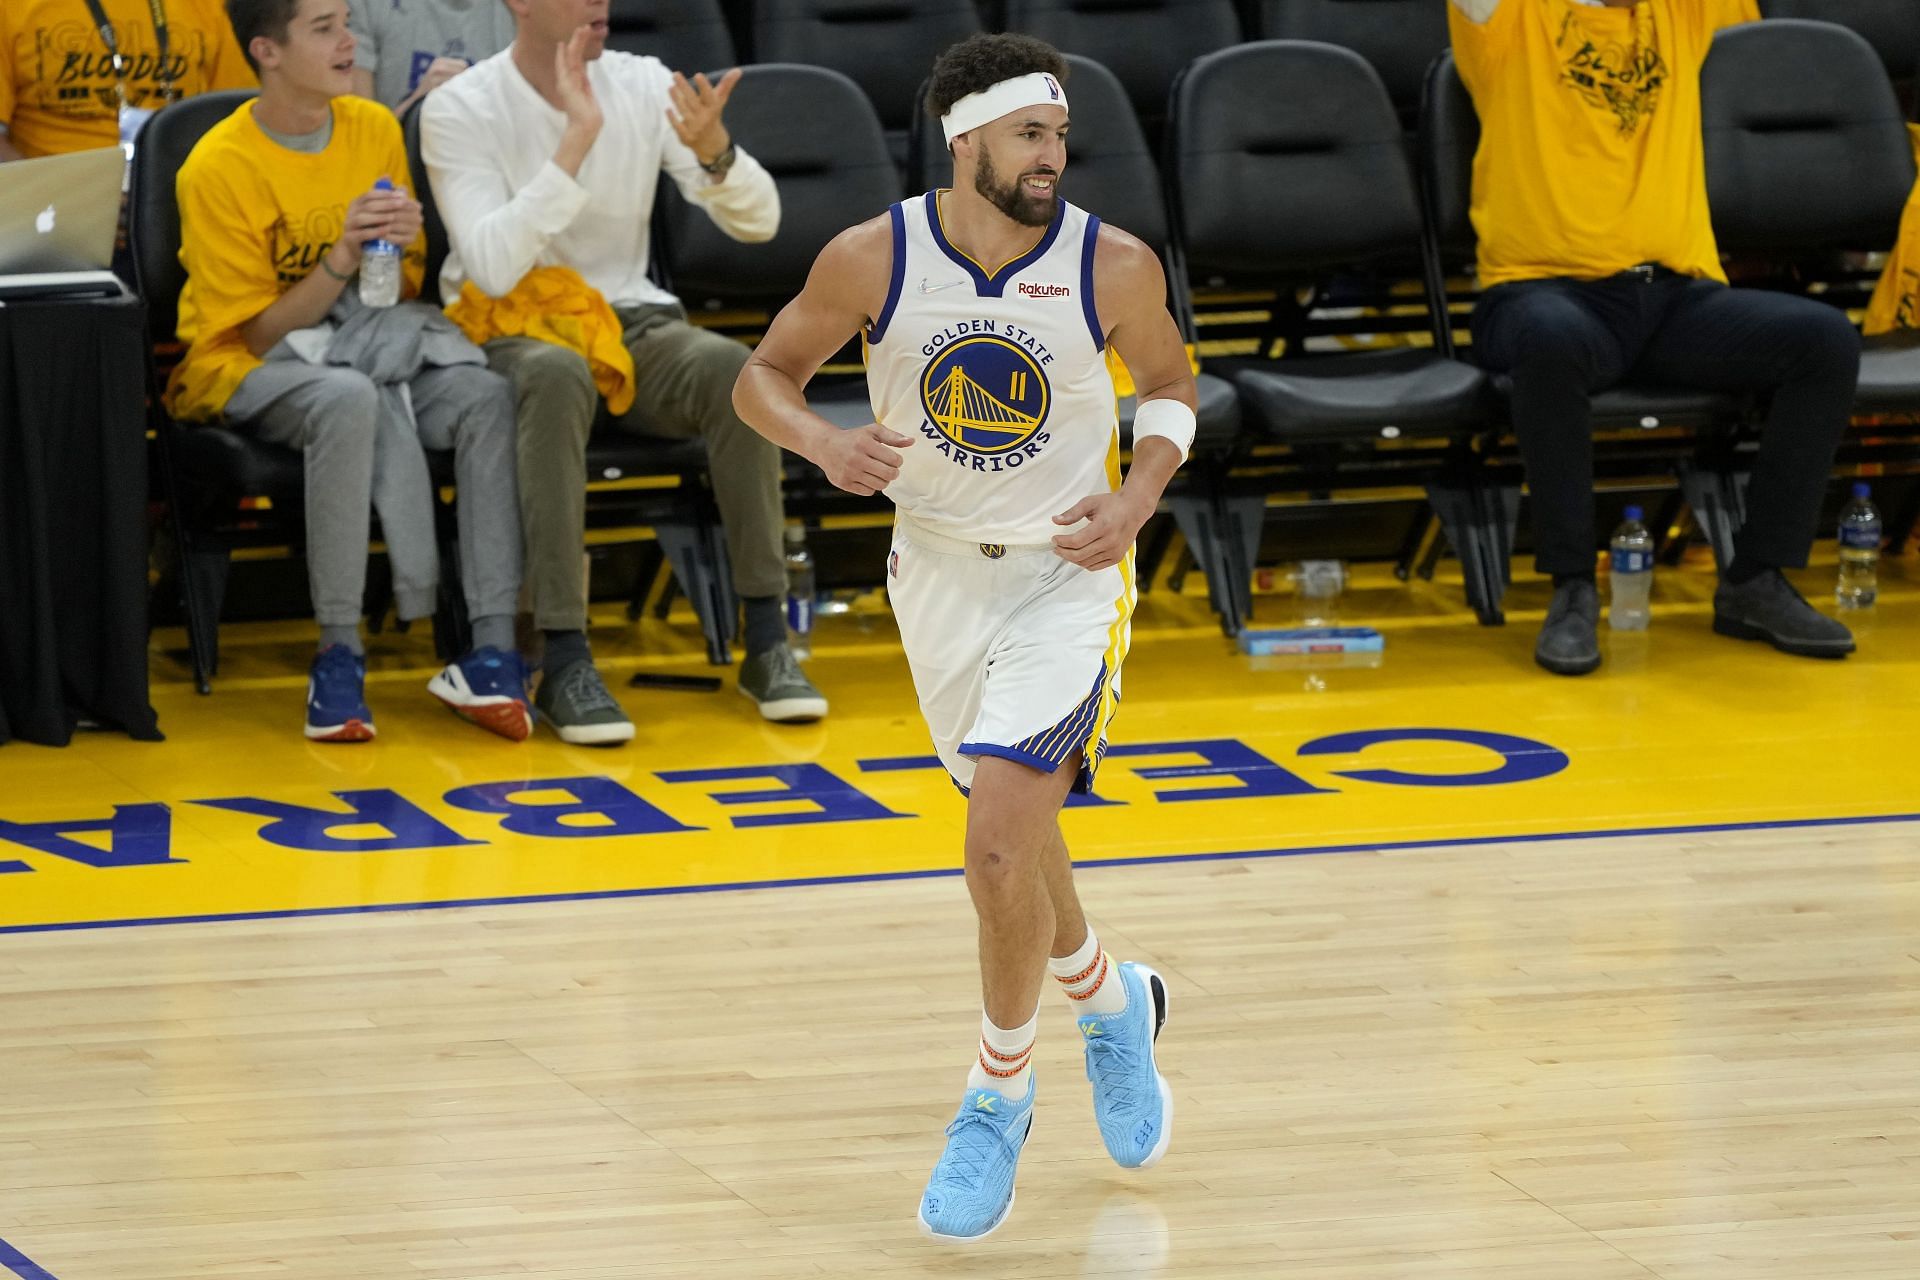 Thompson in action in the 2022 NBA Finals - Game 2